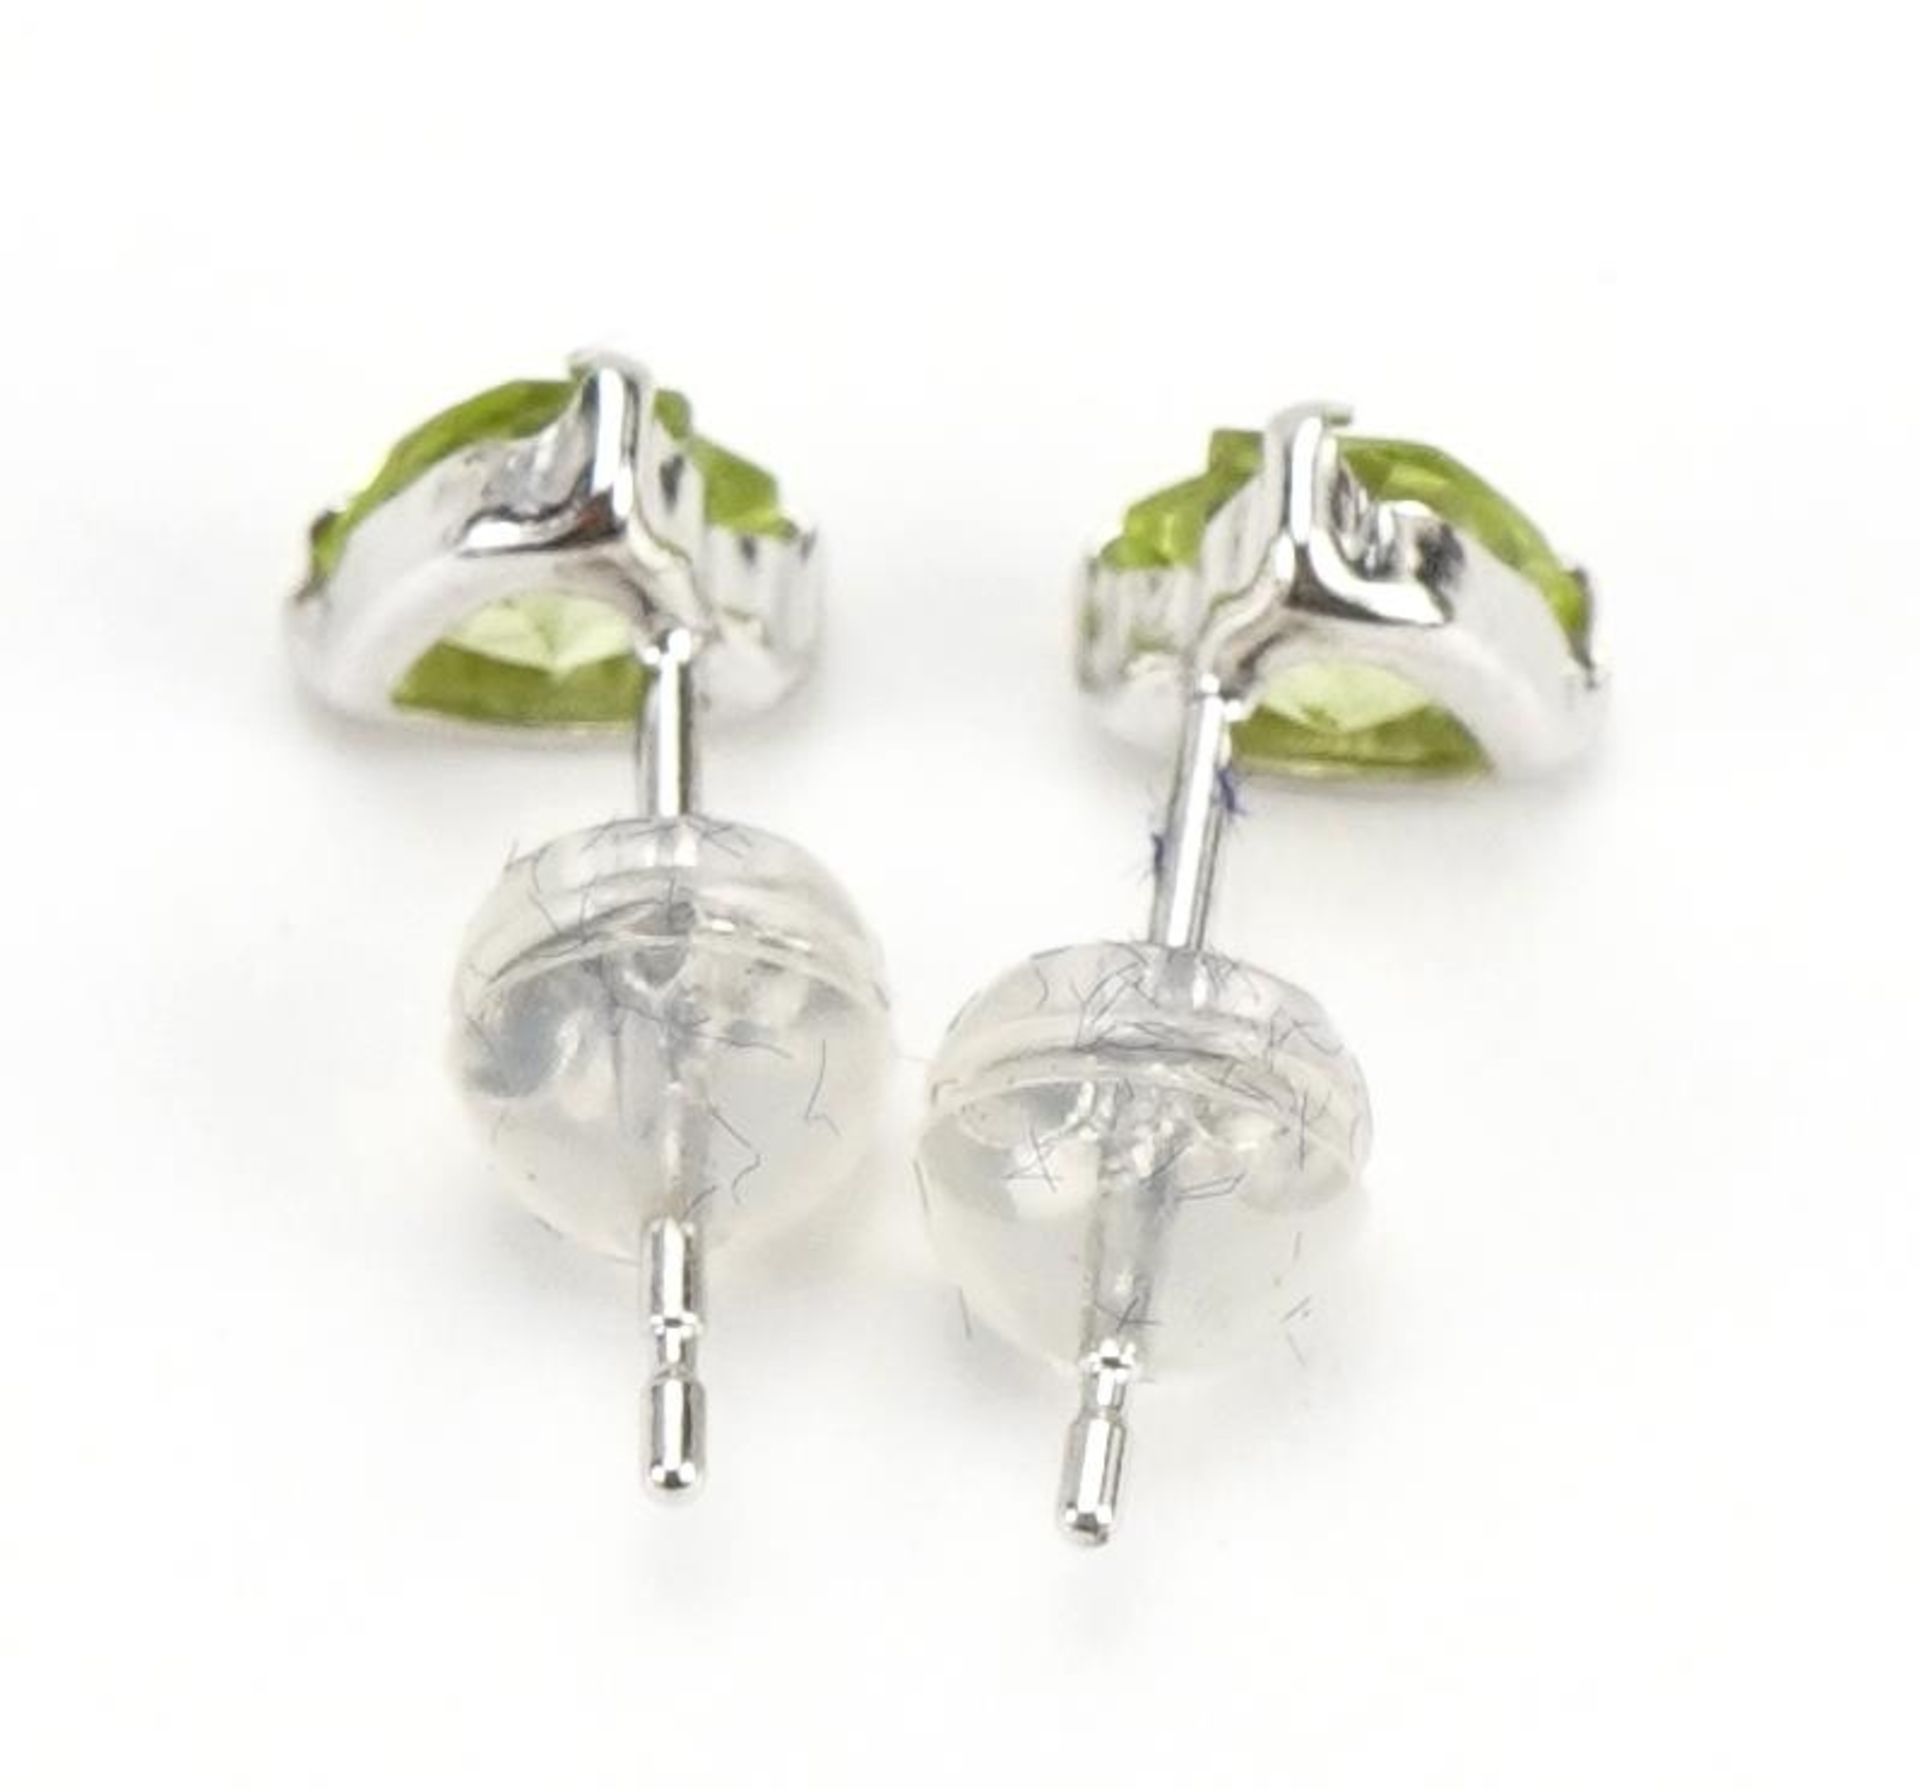 Pair of 18ct white gold peridot love heart stud earrings, 5mm high, 0.4g - Image 2 of 3